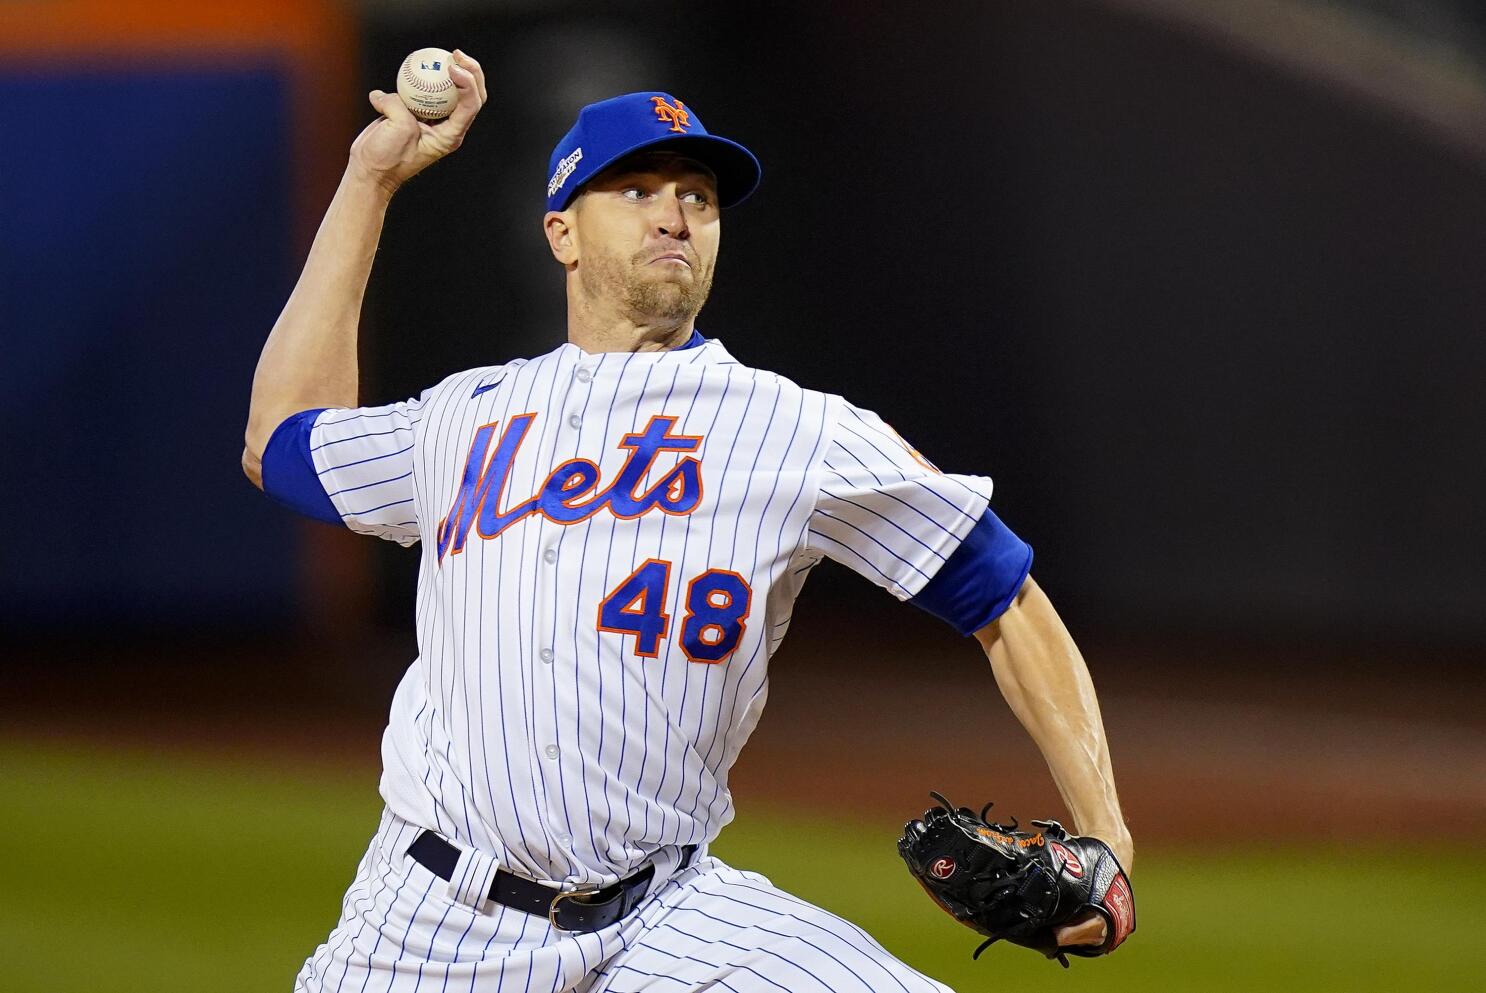 Jacob deGrom Leads Mets' Off-Season Shopping List - The New York Times